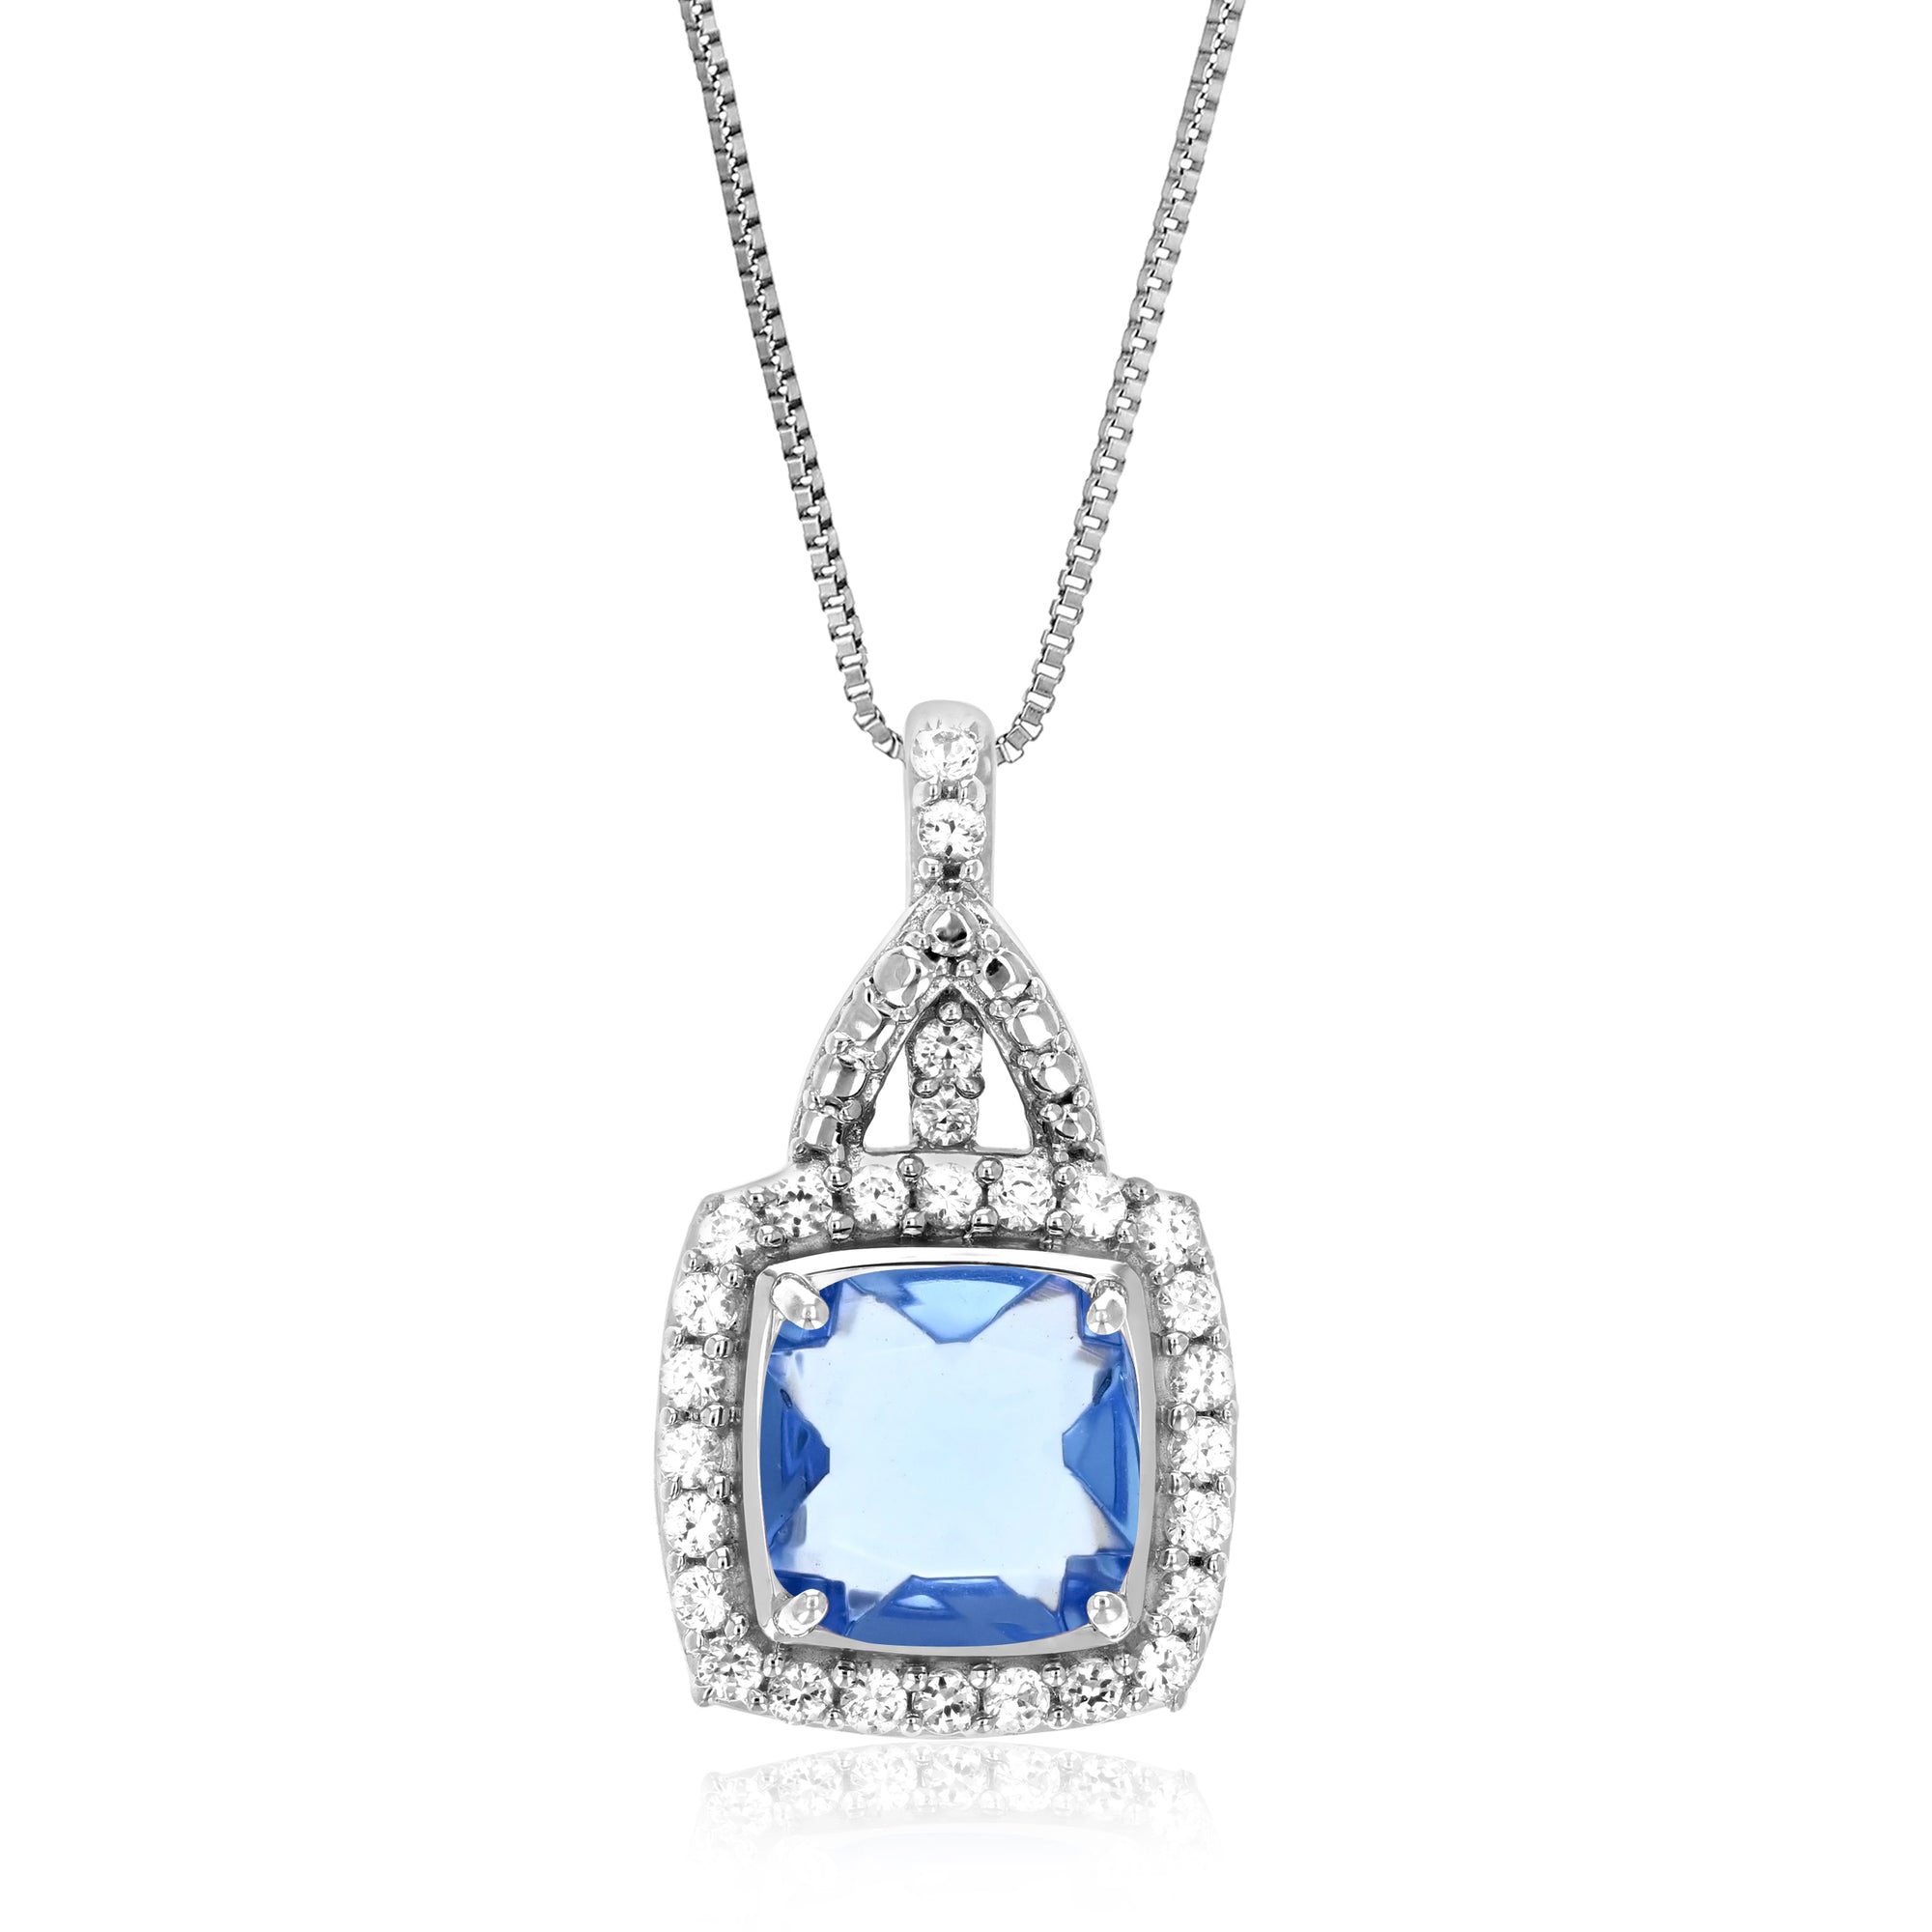 1.50 cttw Cushion Cut Created Aquamarine Pendant .925 Sterling Silver with Chain